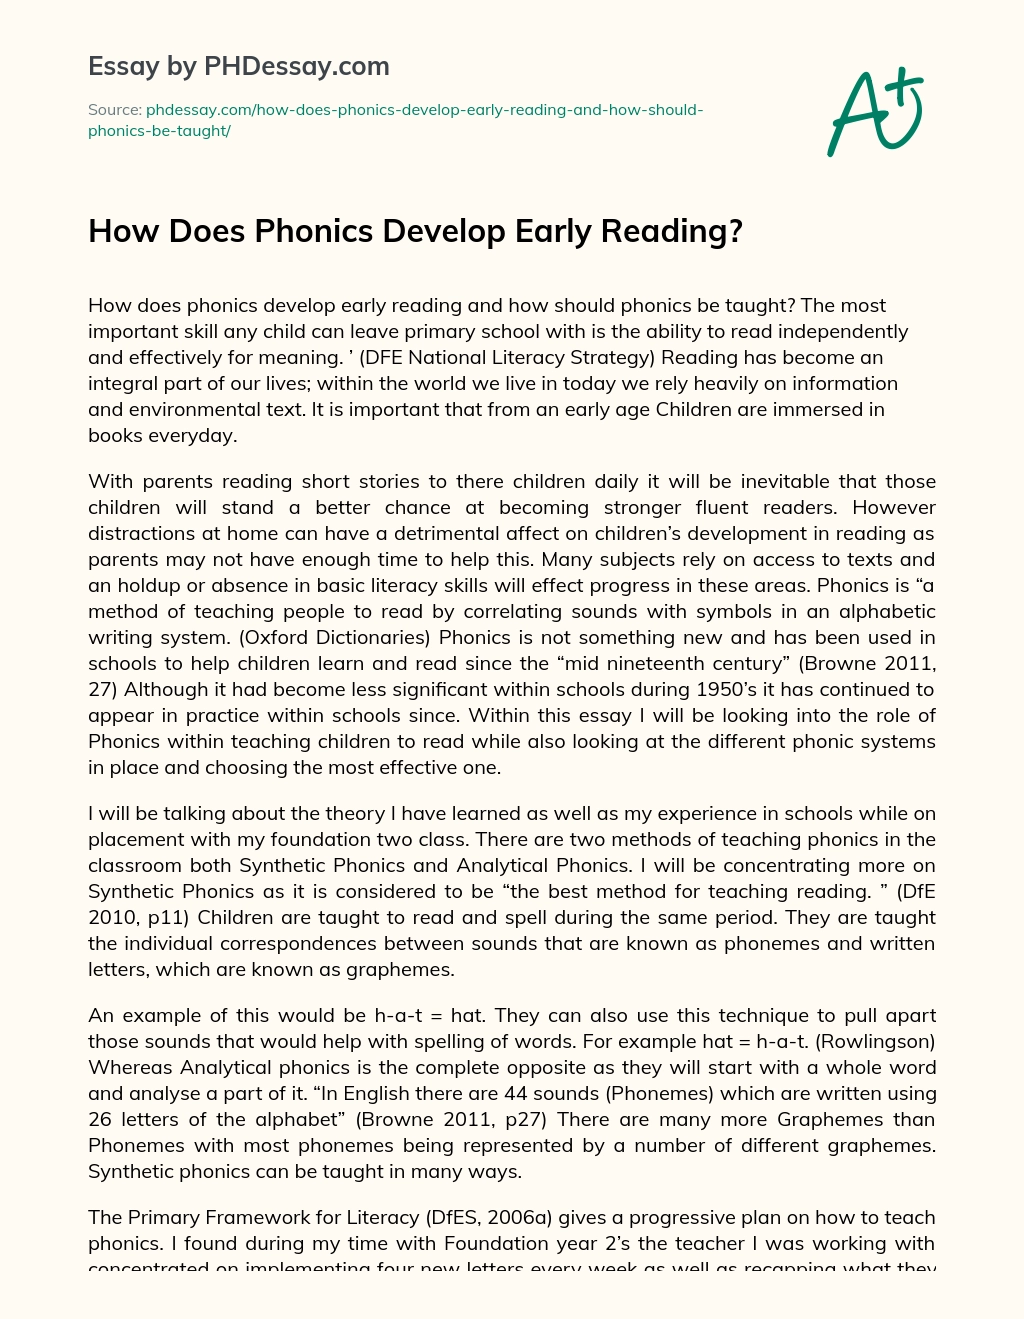 How Does Phonics Develop Early Reading? essay